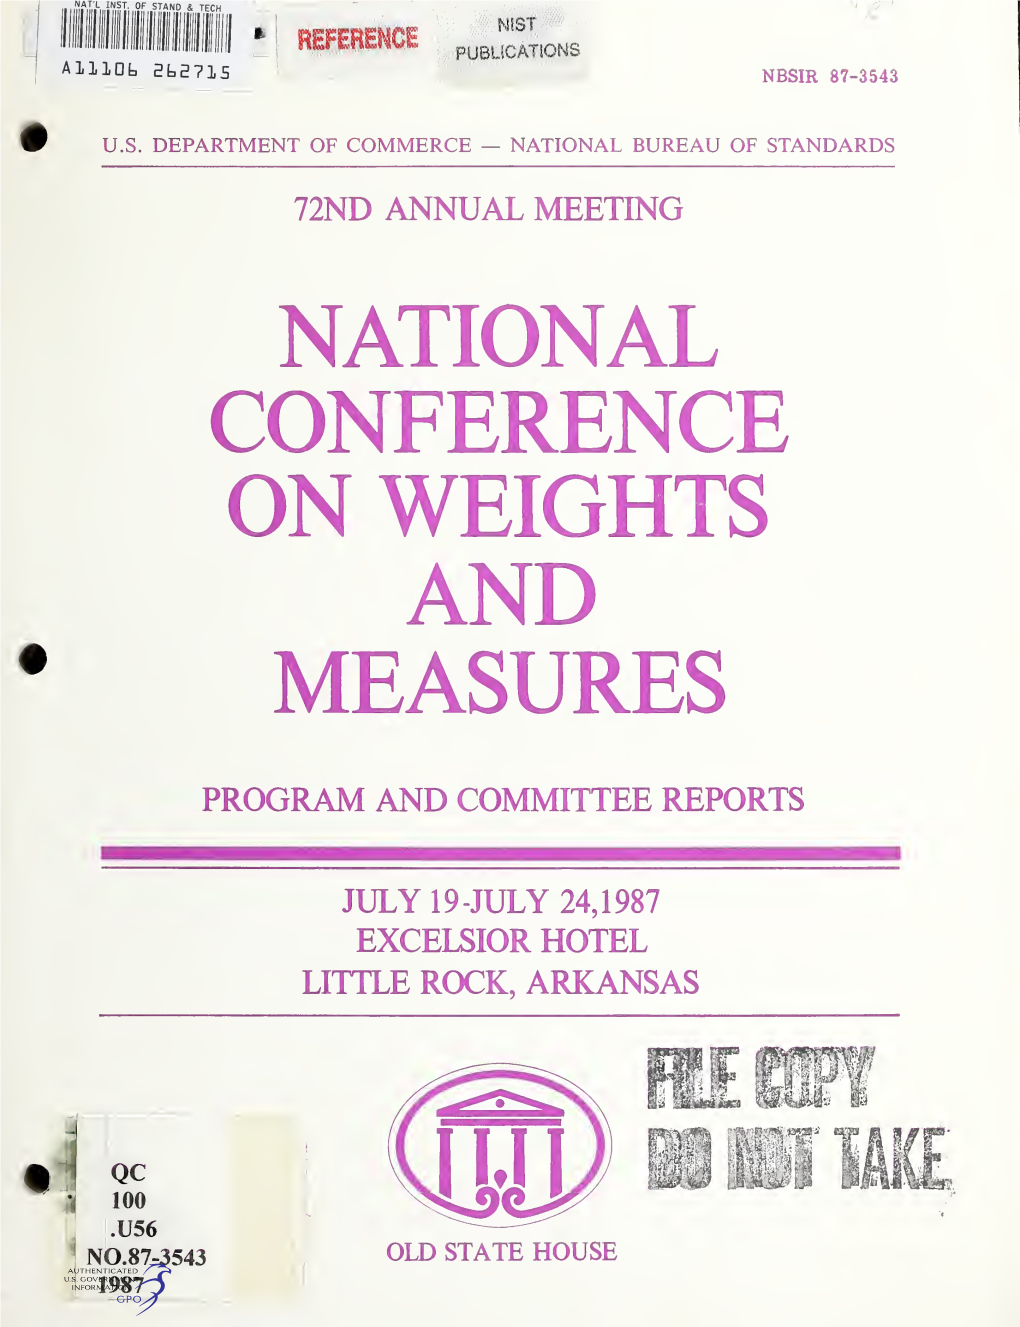 National Conference on Weights and Measures, Program and Committee Reports